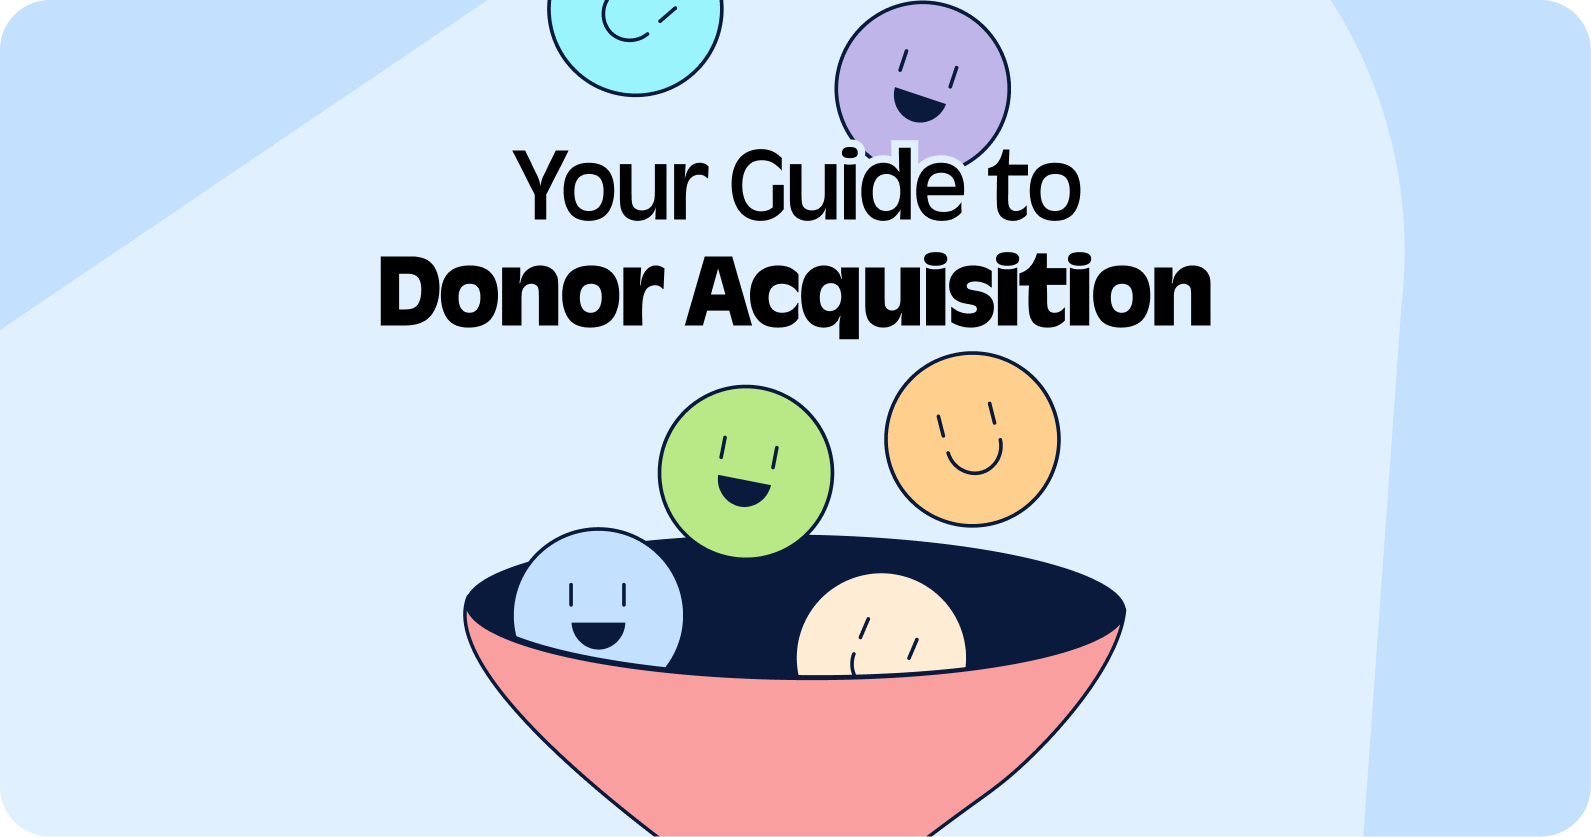 What is attribution and how to use UTM to leverage donor acquisition